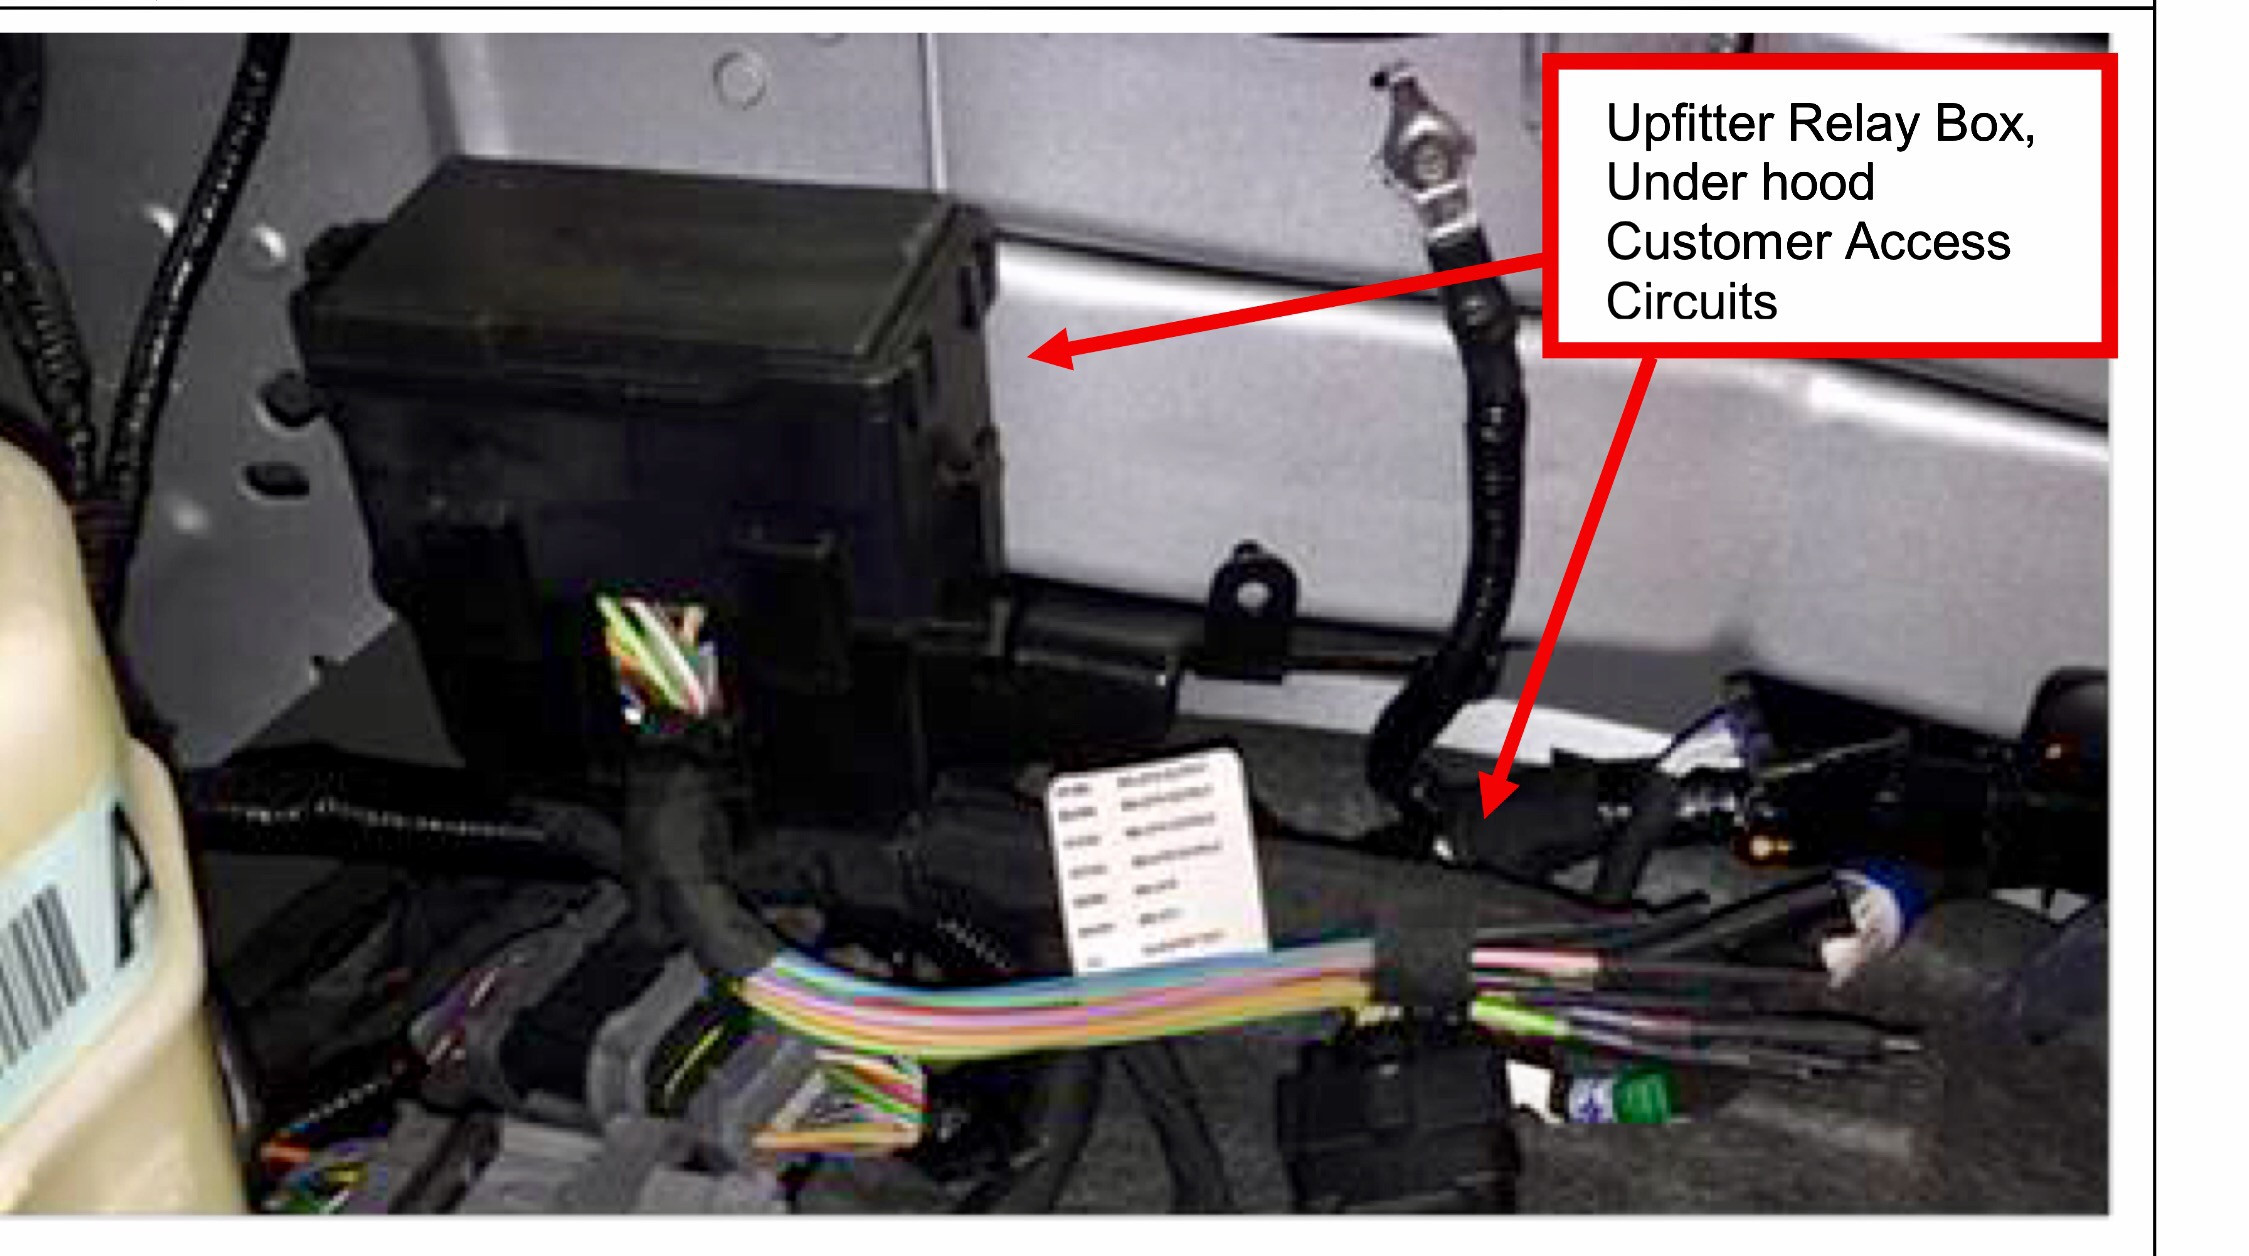 2017 F350 Upfitter Switch Wiring Diagram Awesome 2017 Sd Upfitter Connections - ford Truck Enthusiasts forums